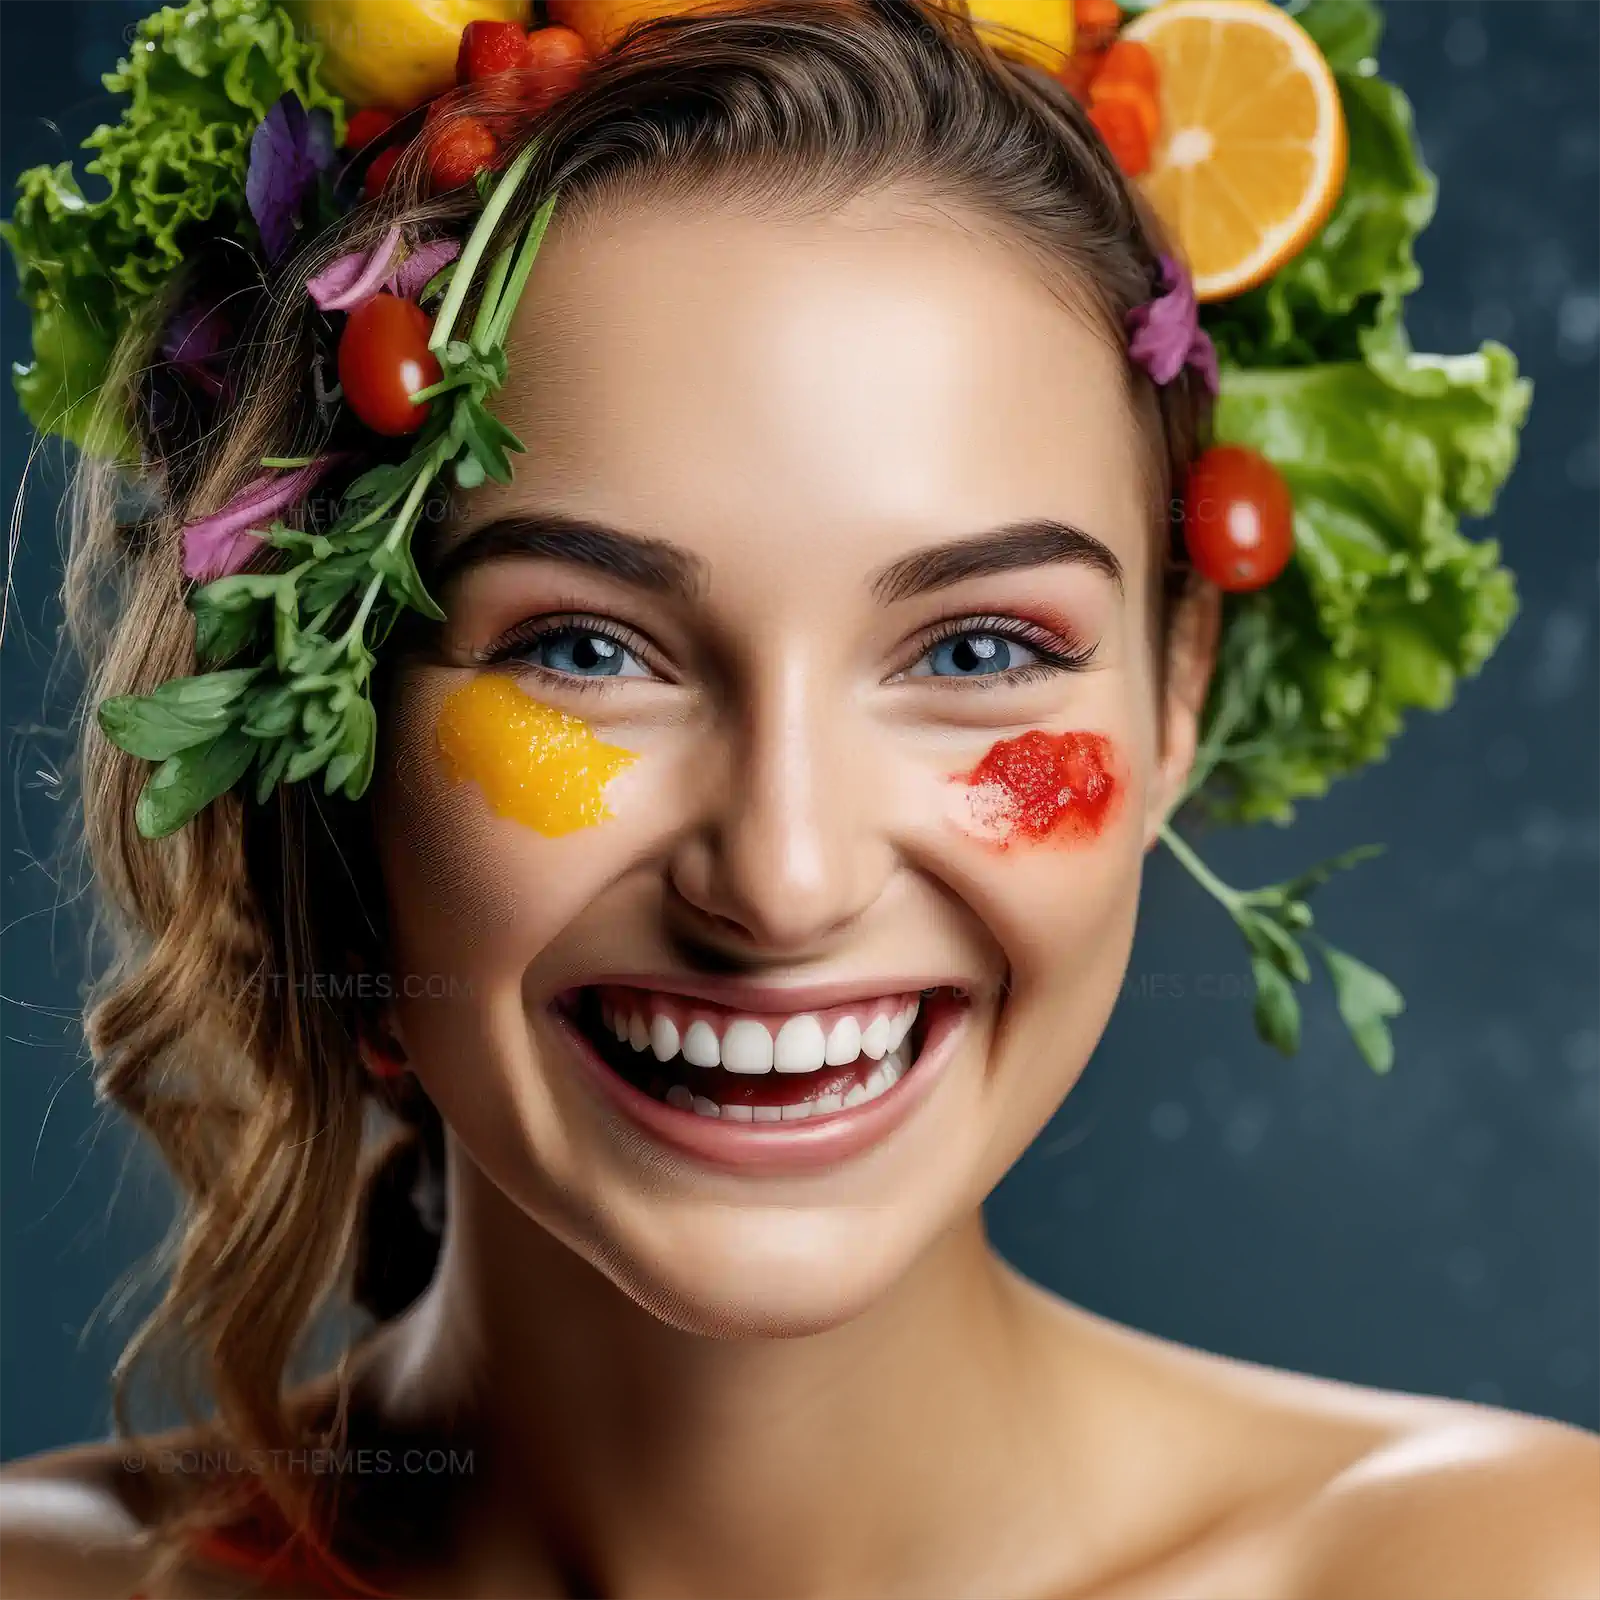 Vegan woman with vegetables and fruits